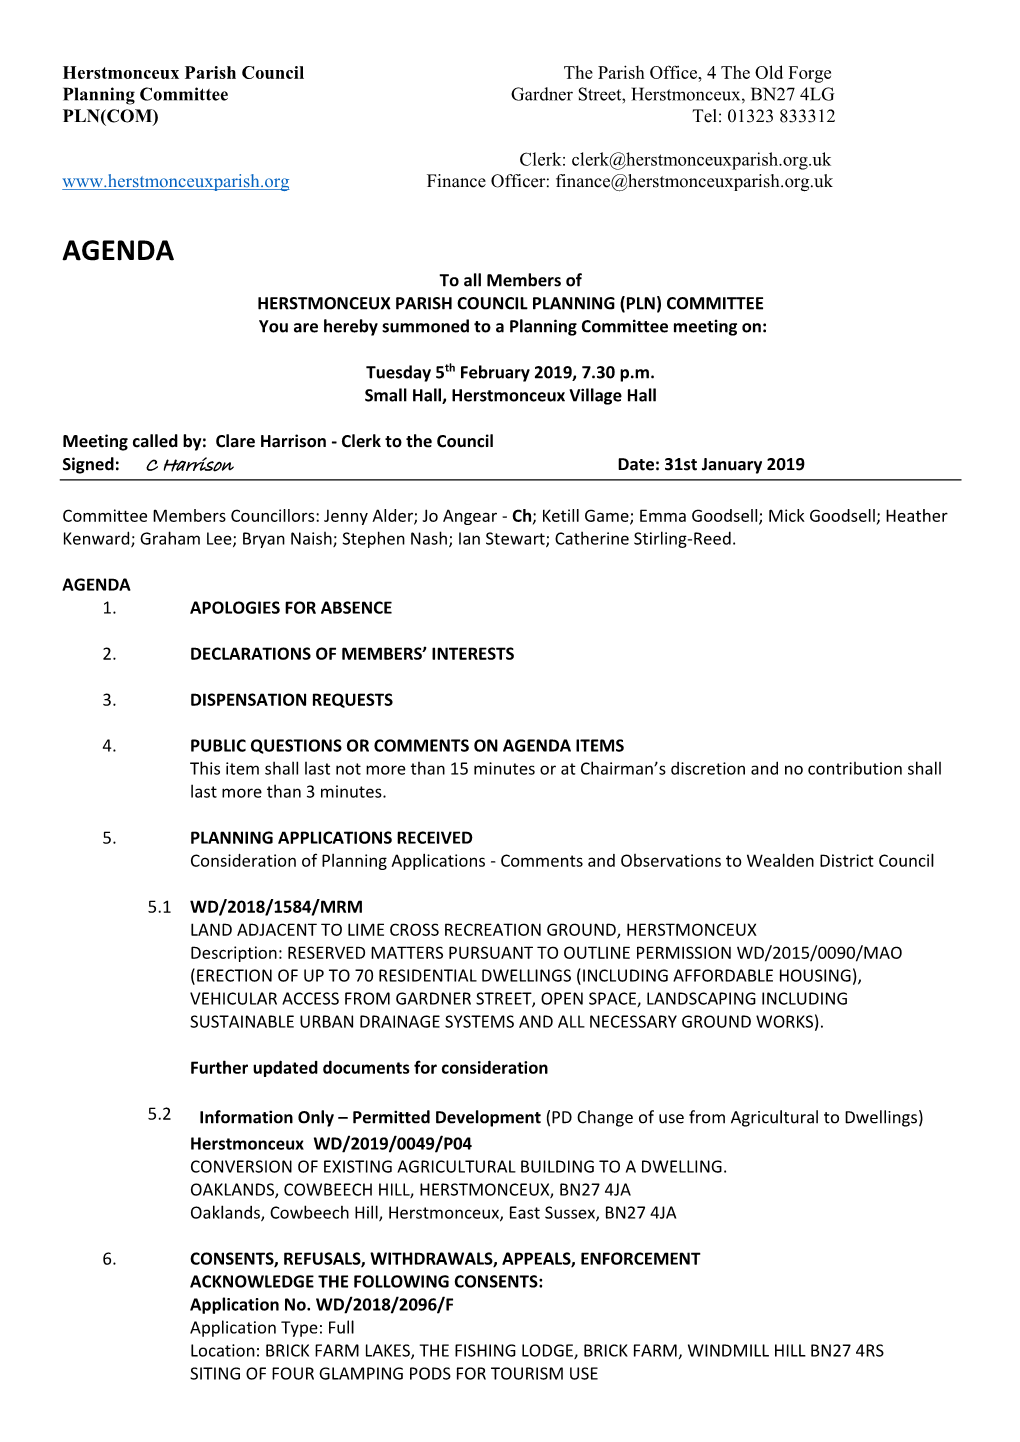 AGENDA to All Members of HERSTMONCEUX PARISH COUNCIL PLANNING (PLN) COMMITTEE You Are Hereby Summoned to a Planning Committee Meeting On